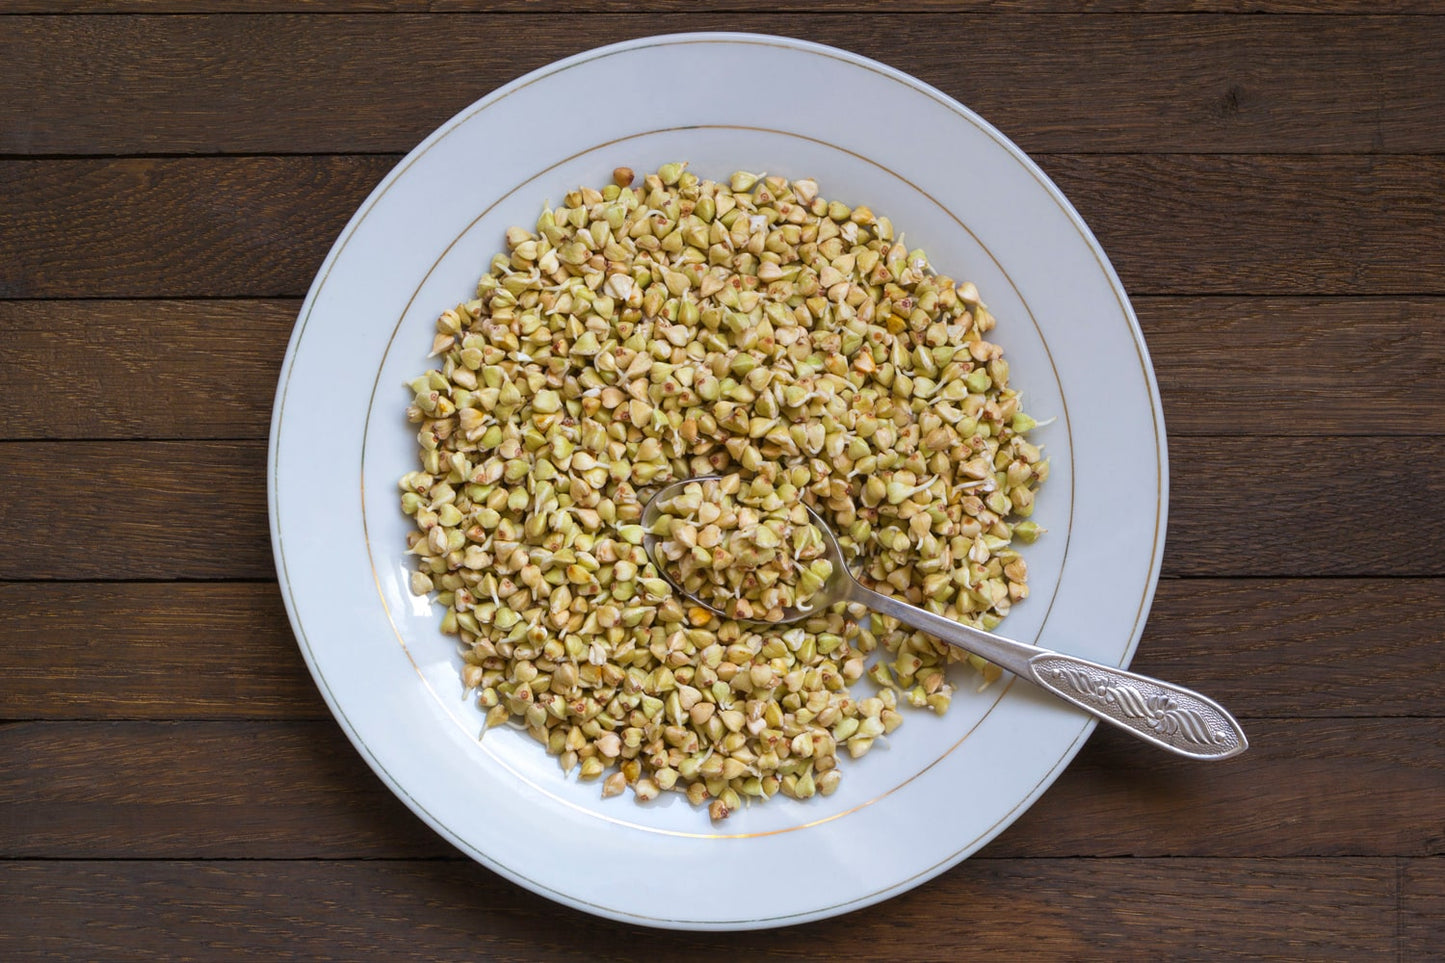 Buckwheat Groats - Hulled Whole Grains, Raw, Kosher, Vegan, Sirtfood, Bulk, Good Source of Dietary Fiber, Copper, Magnesium, Manganese, and Niacin - by Food to Live